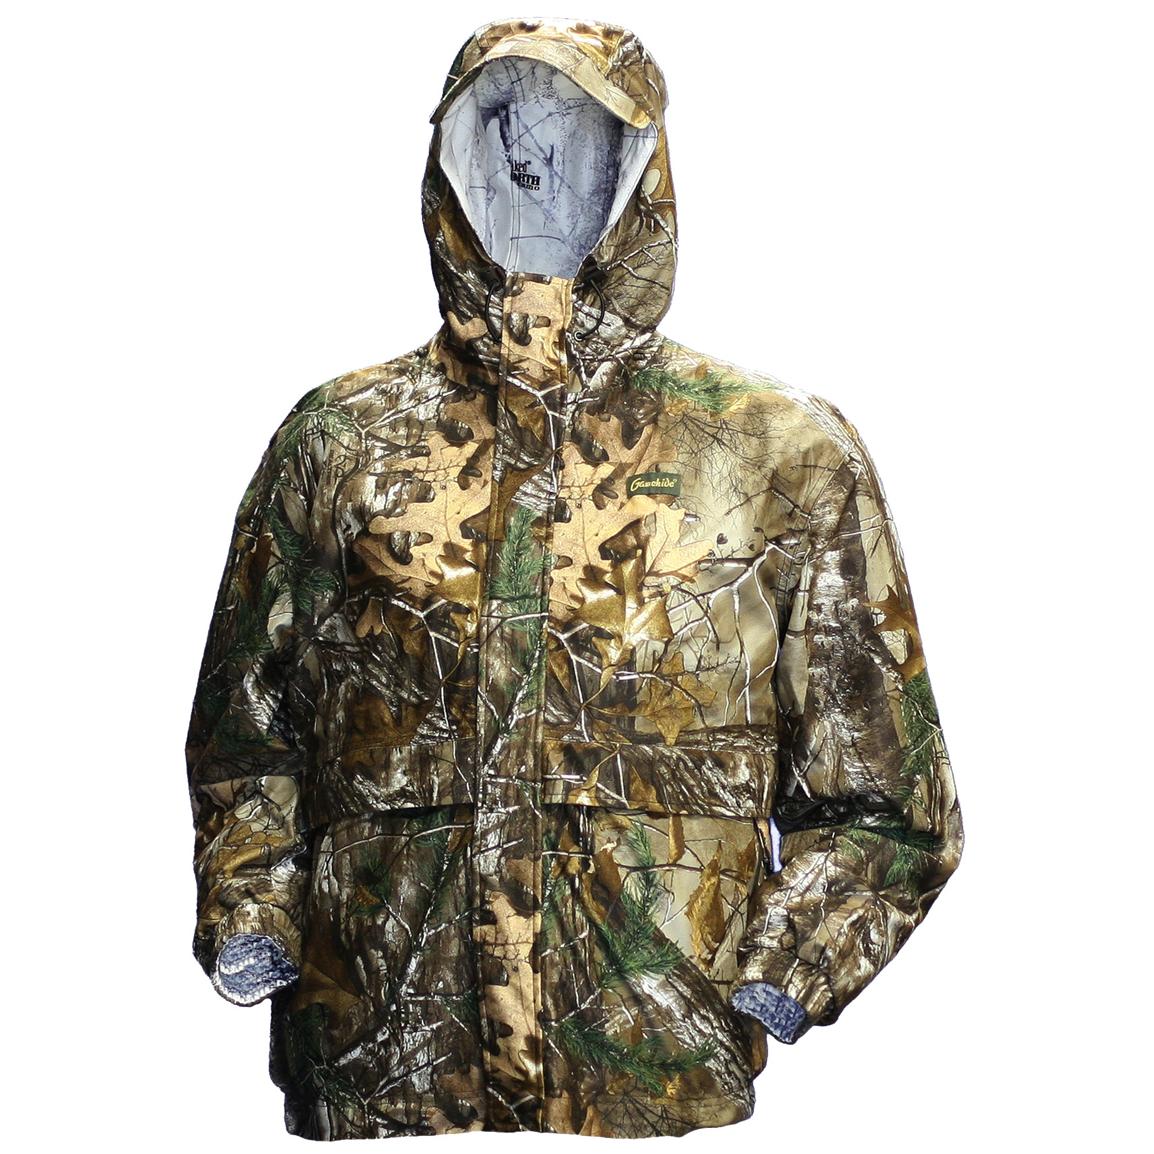 Gamehide® Trail's End Reversible Jacket, Realtree Xtra® / Snow Camo ...